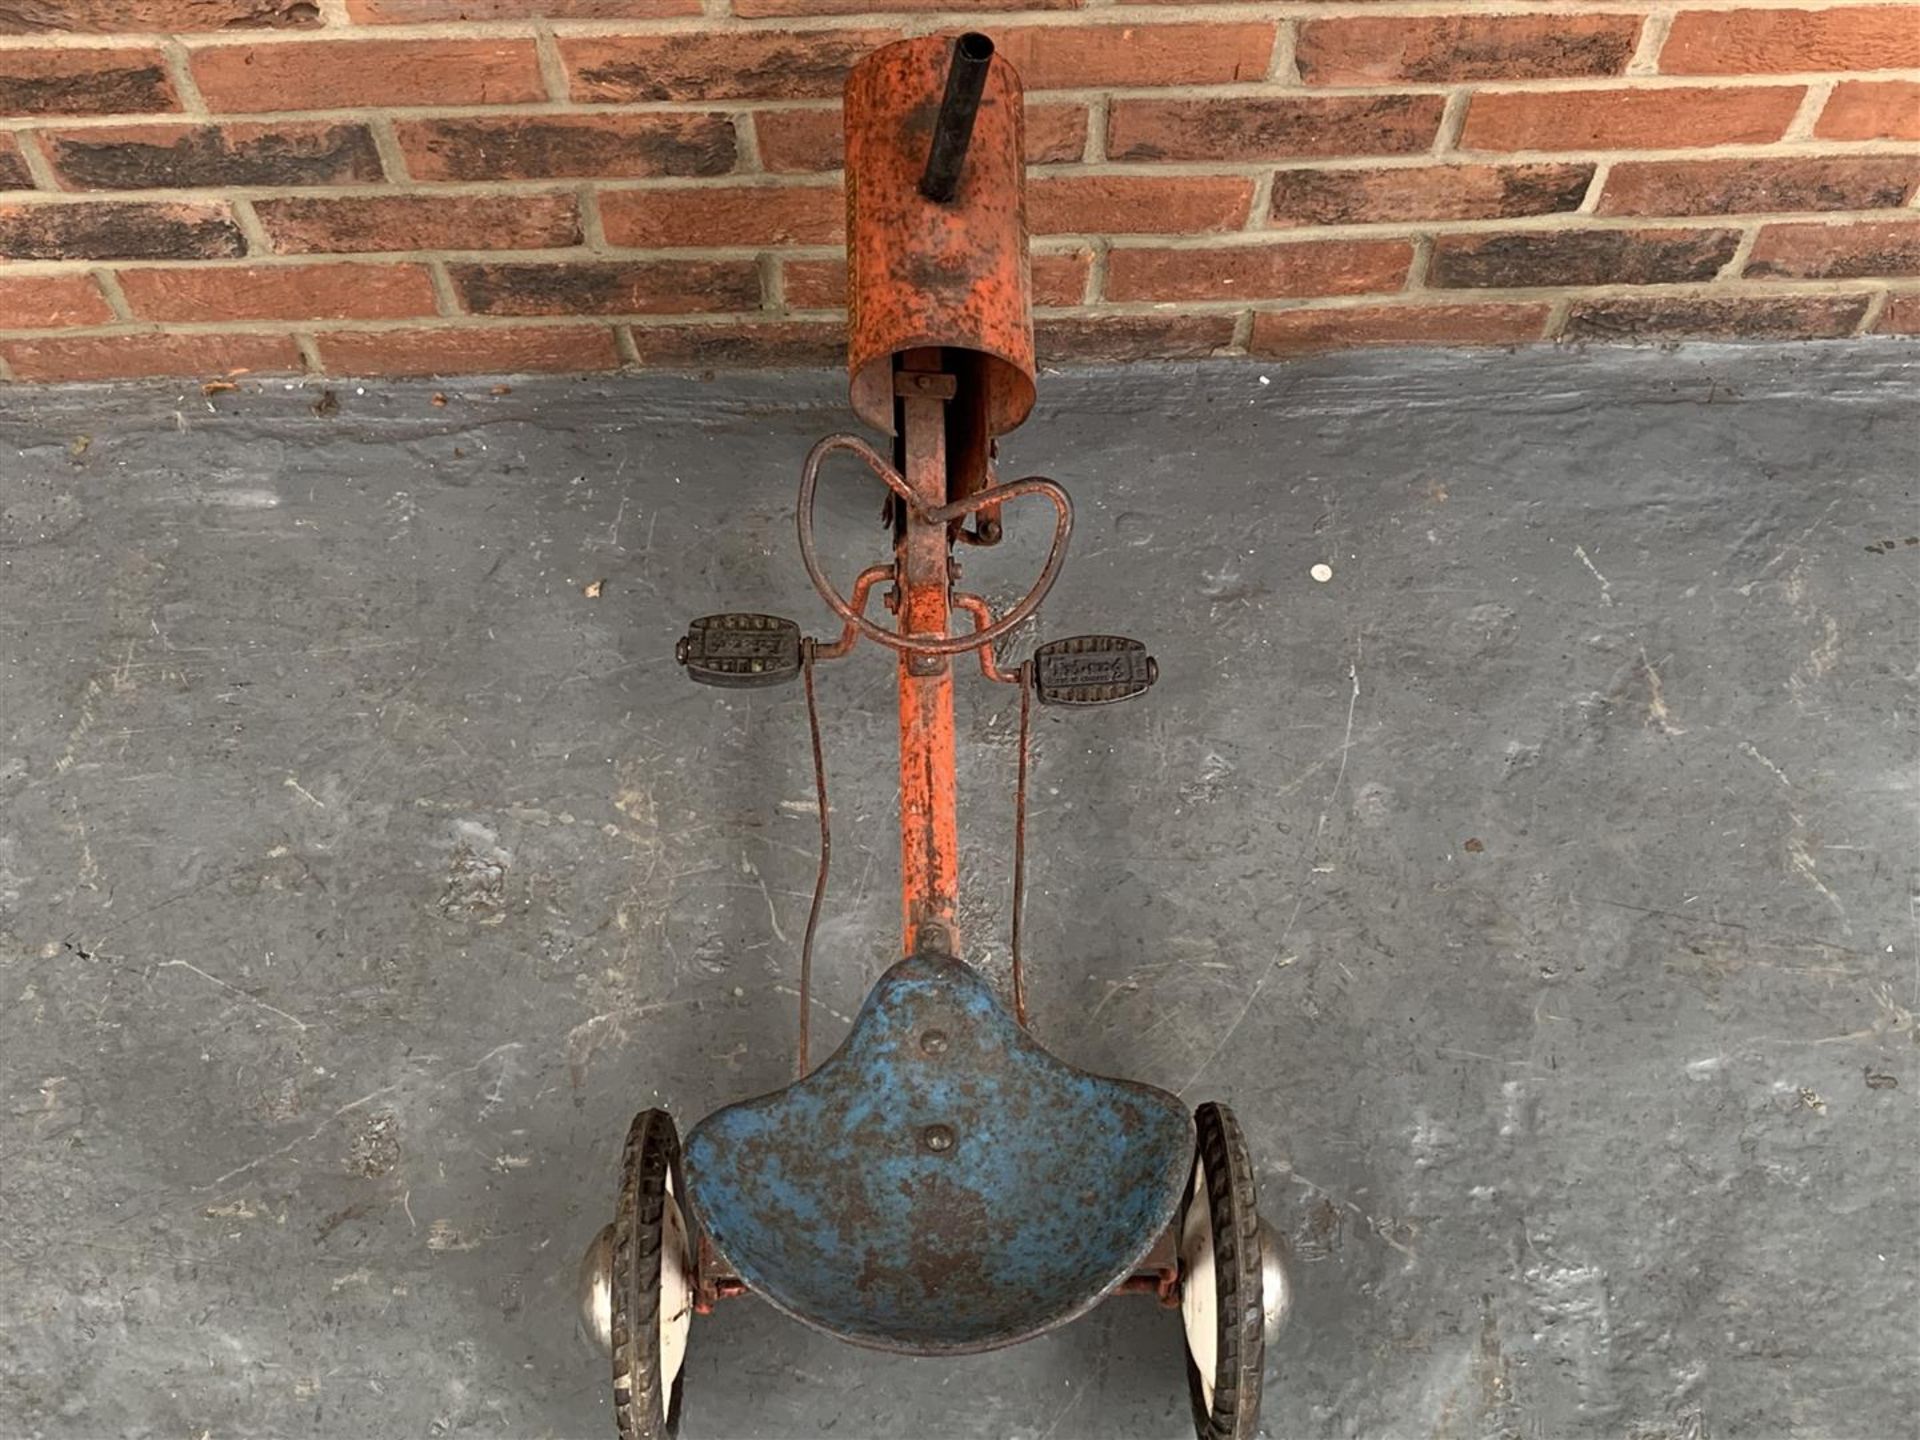 Vintage Tri-Ang Midget" Child's Pedal Tractor" - Image 6 of 7